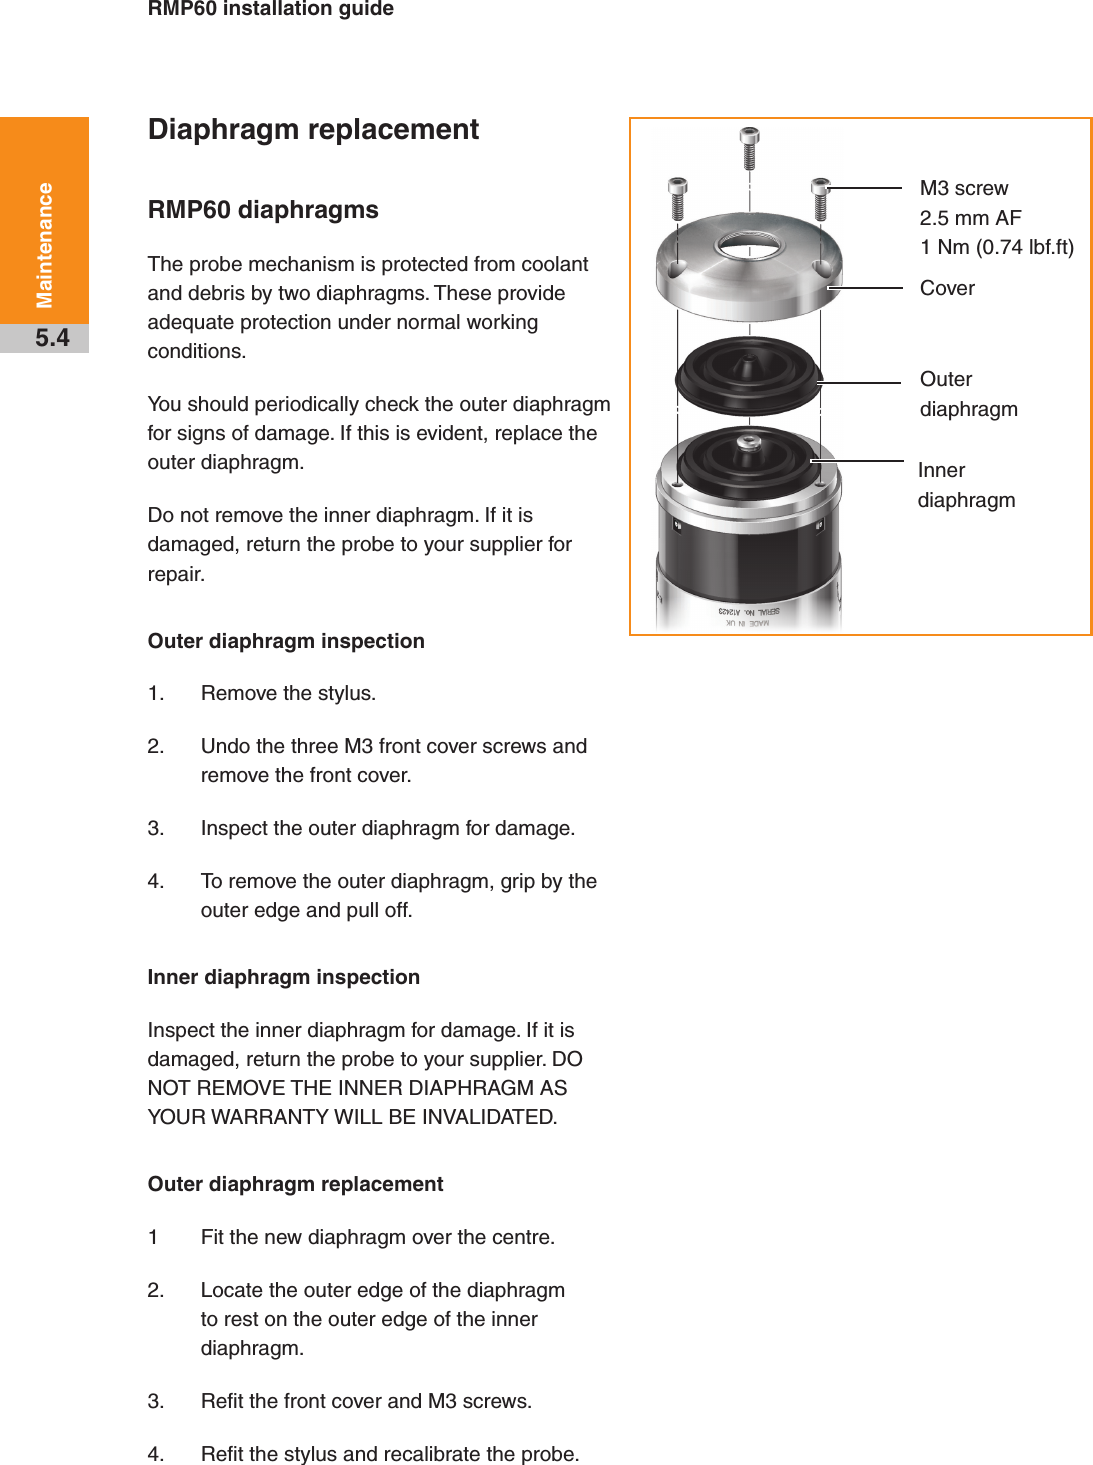 RMP60 installation guide5.4MaintenanceDiaphragm replacementRMP60 diaphragmsThe probe mechanism is protected from coolant and debris by two diaphragms. These provide adequate protection under normal working conditions. You should periodically check the outer diaphragm for signs of damage. If this is evident, replace the outer diaphragm.Do not remove the inner diaphragm. If it is damaged, return the probe to your supplier for repair. Outer diaphragm inspection1.  Remove the stylus.2.  Undo the three M3 front cover screws and remove the front cover.3.  Inspect the outer diaphragm for damage.4.  To remove the outer diaphragm, grip by the outer edge and pull off.Inner diaphragm inspectionInspect the inner diaphragm for damage. If it is damaged, return the probe to your supplier. DO NOT REMOVE THE INNER DIAPHRAGM AS YOUR WARRANTY WILL BE INVALIDATED.Outer diaphragm replacement1  Fit the new diaphragm over the centre.2.  Locate the outer edge of the diaphragm to rest on the outer edge of the inner diaphragm.3.  Refit the front cover and M3 screws.4.  Refit the stylus and recalibrate the probe.M3 screw2.5 mm AF 1 Nm (0.74 lbf.ft)CoverOuter diaphragmInner diaphragmDraft copy  09/07/12